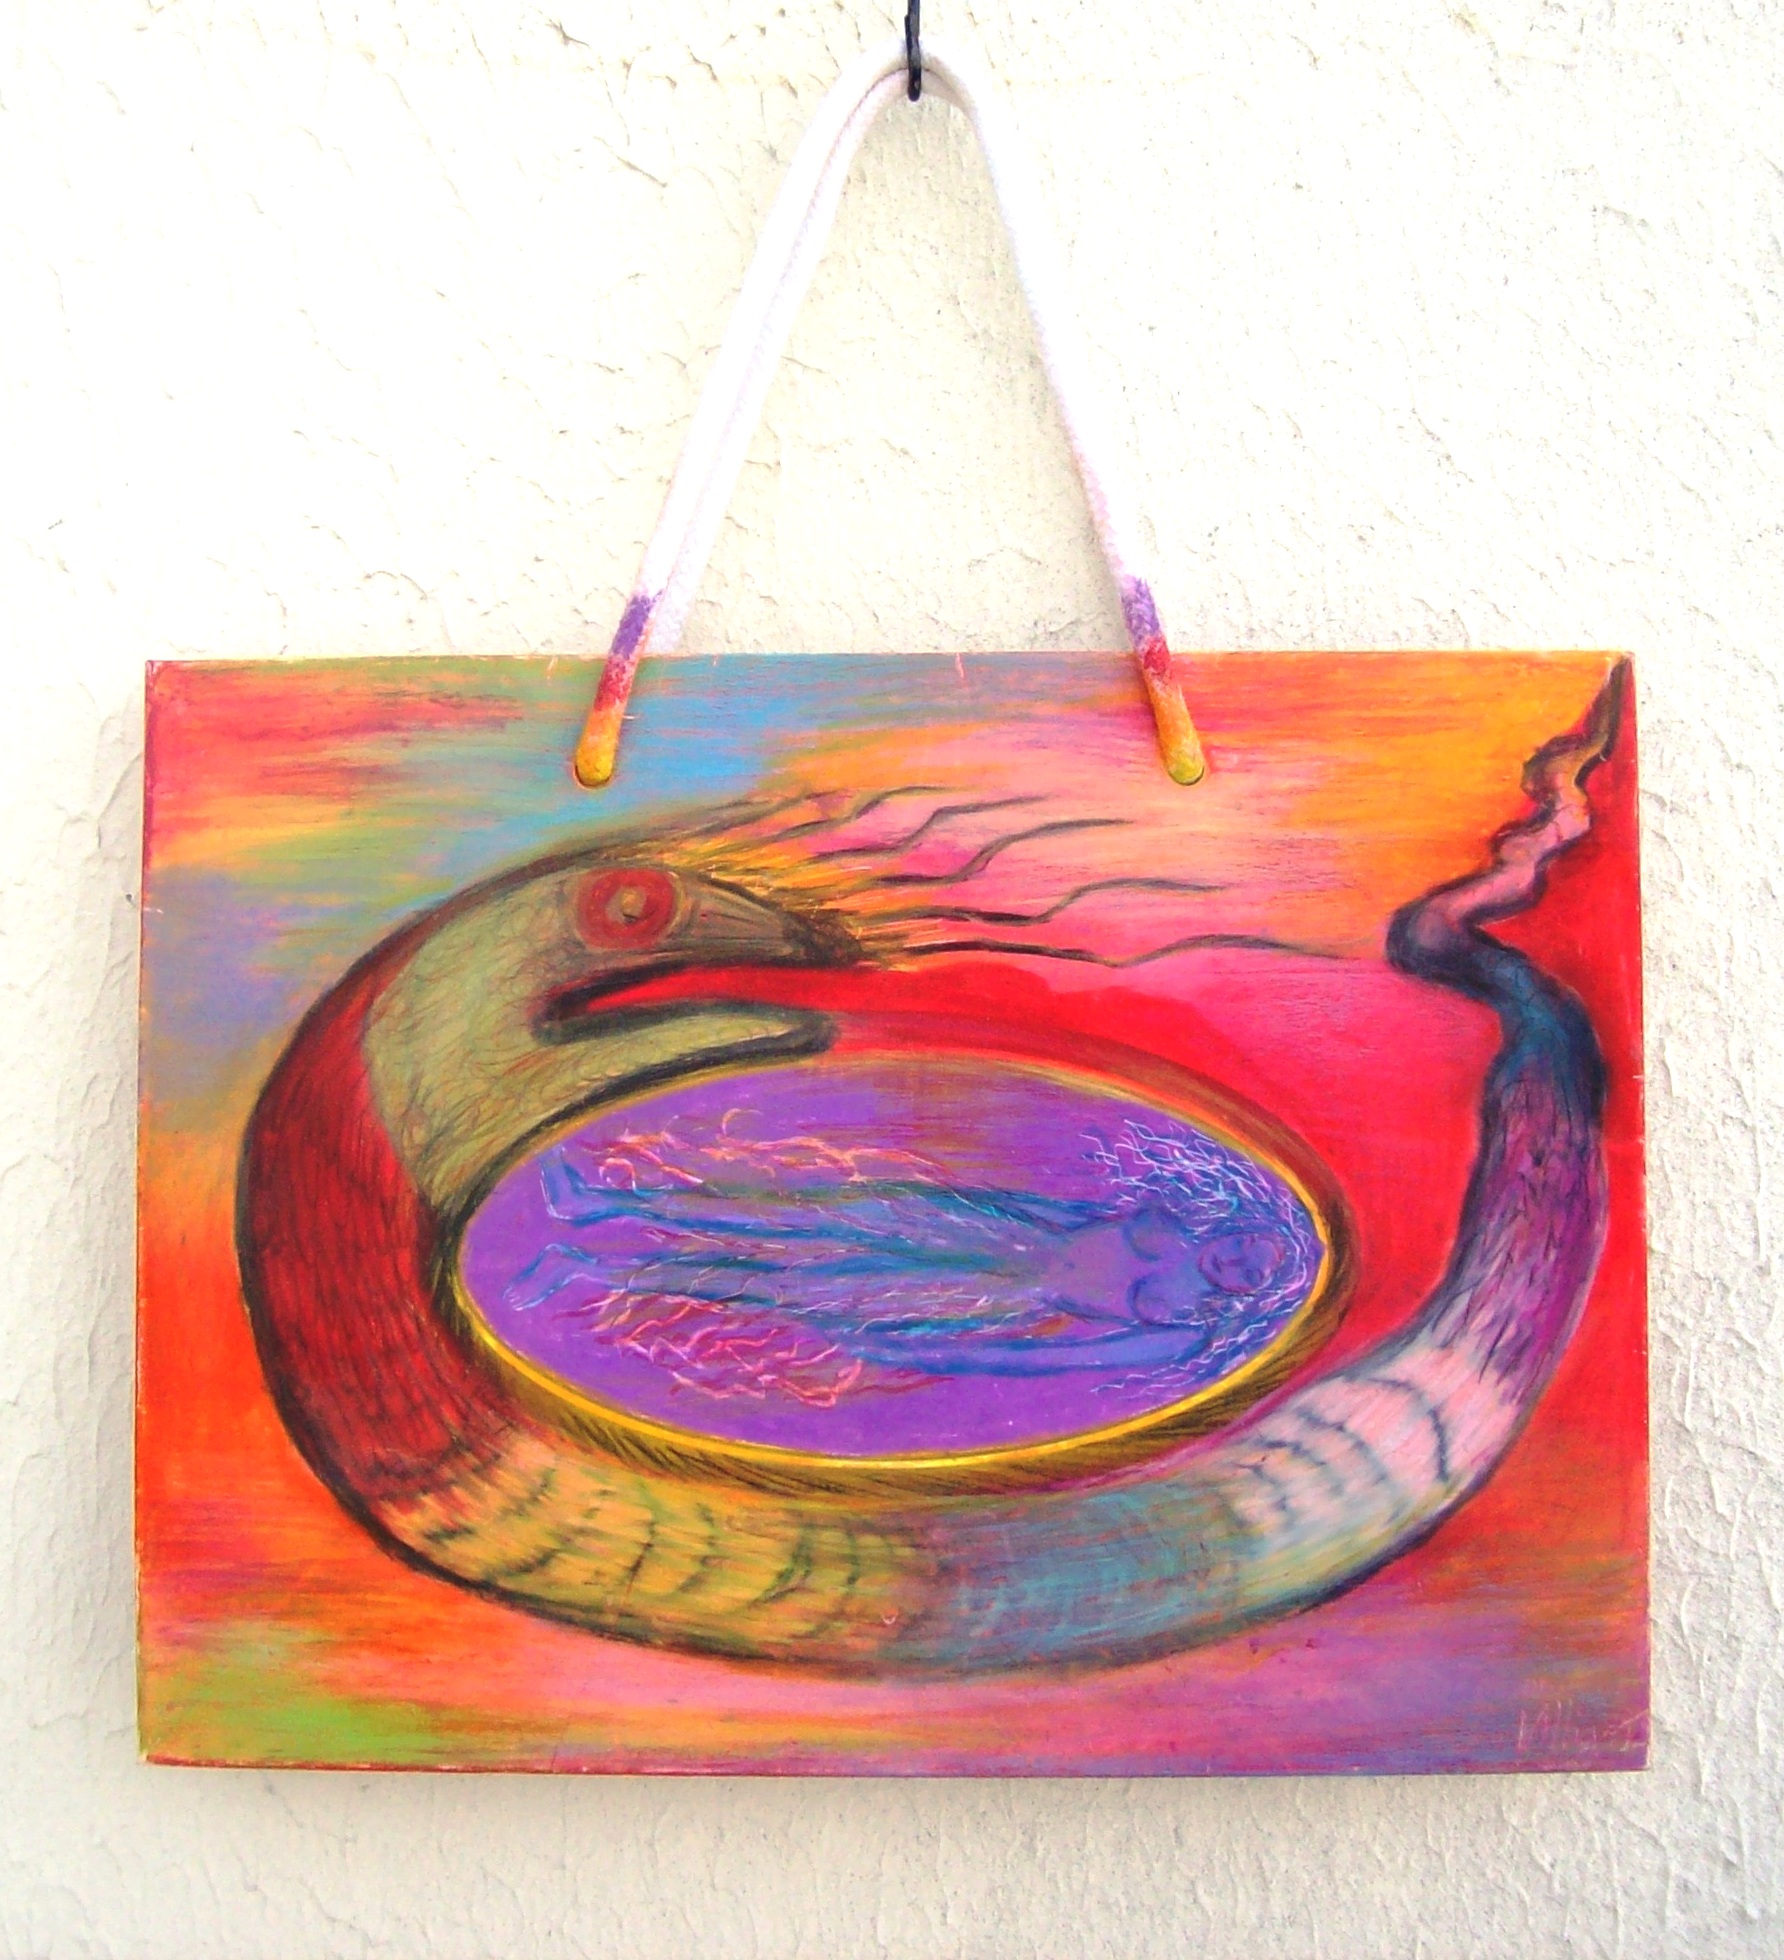 reveuse-au-serpent-dreamer-to-snake-work-on-upcycling-bag-23-x-28-cm-mixed-media